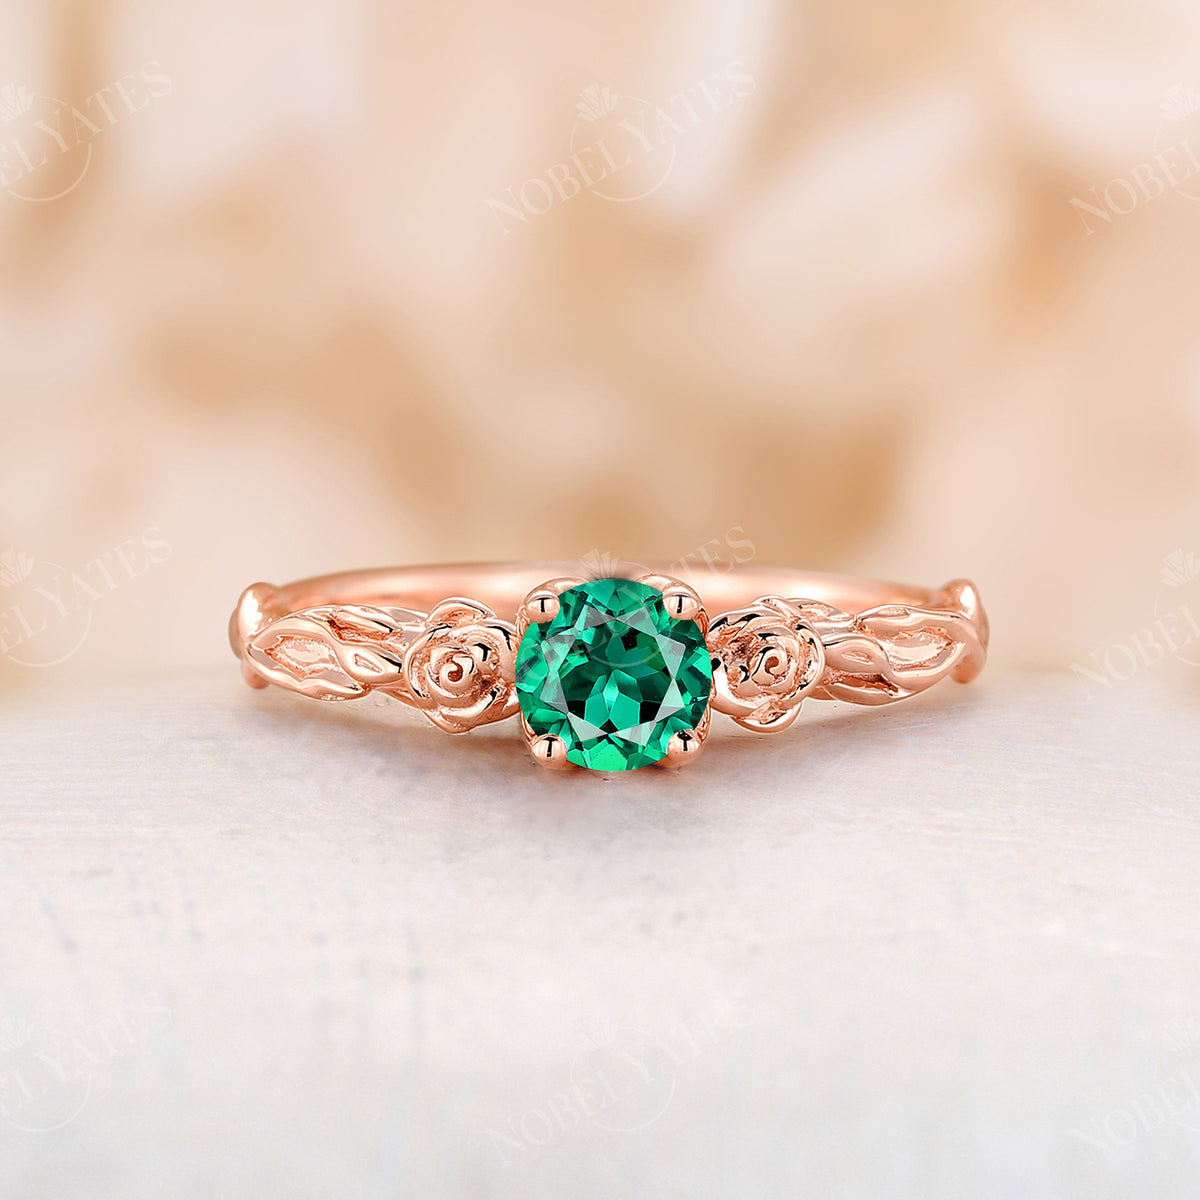 Moss Agate Rose Gold Twist Floral Engagement Ring Nature Inspired